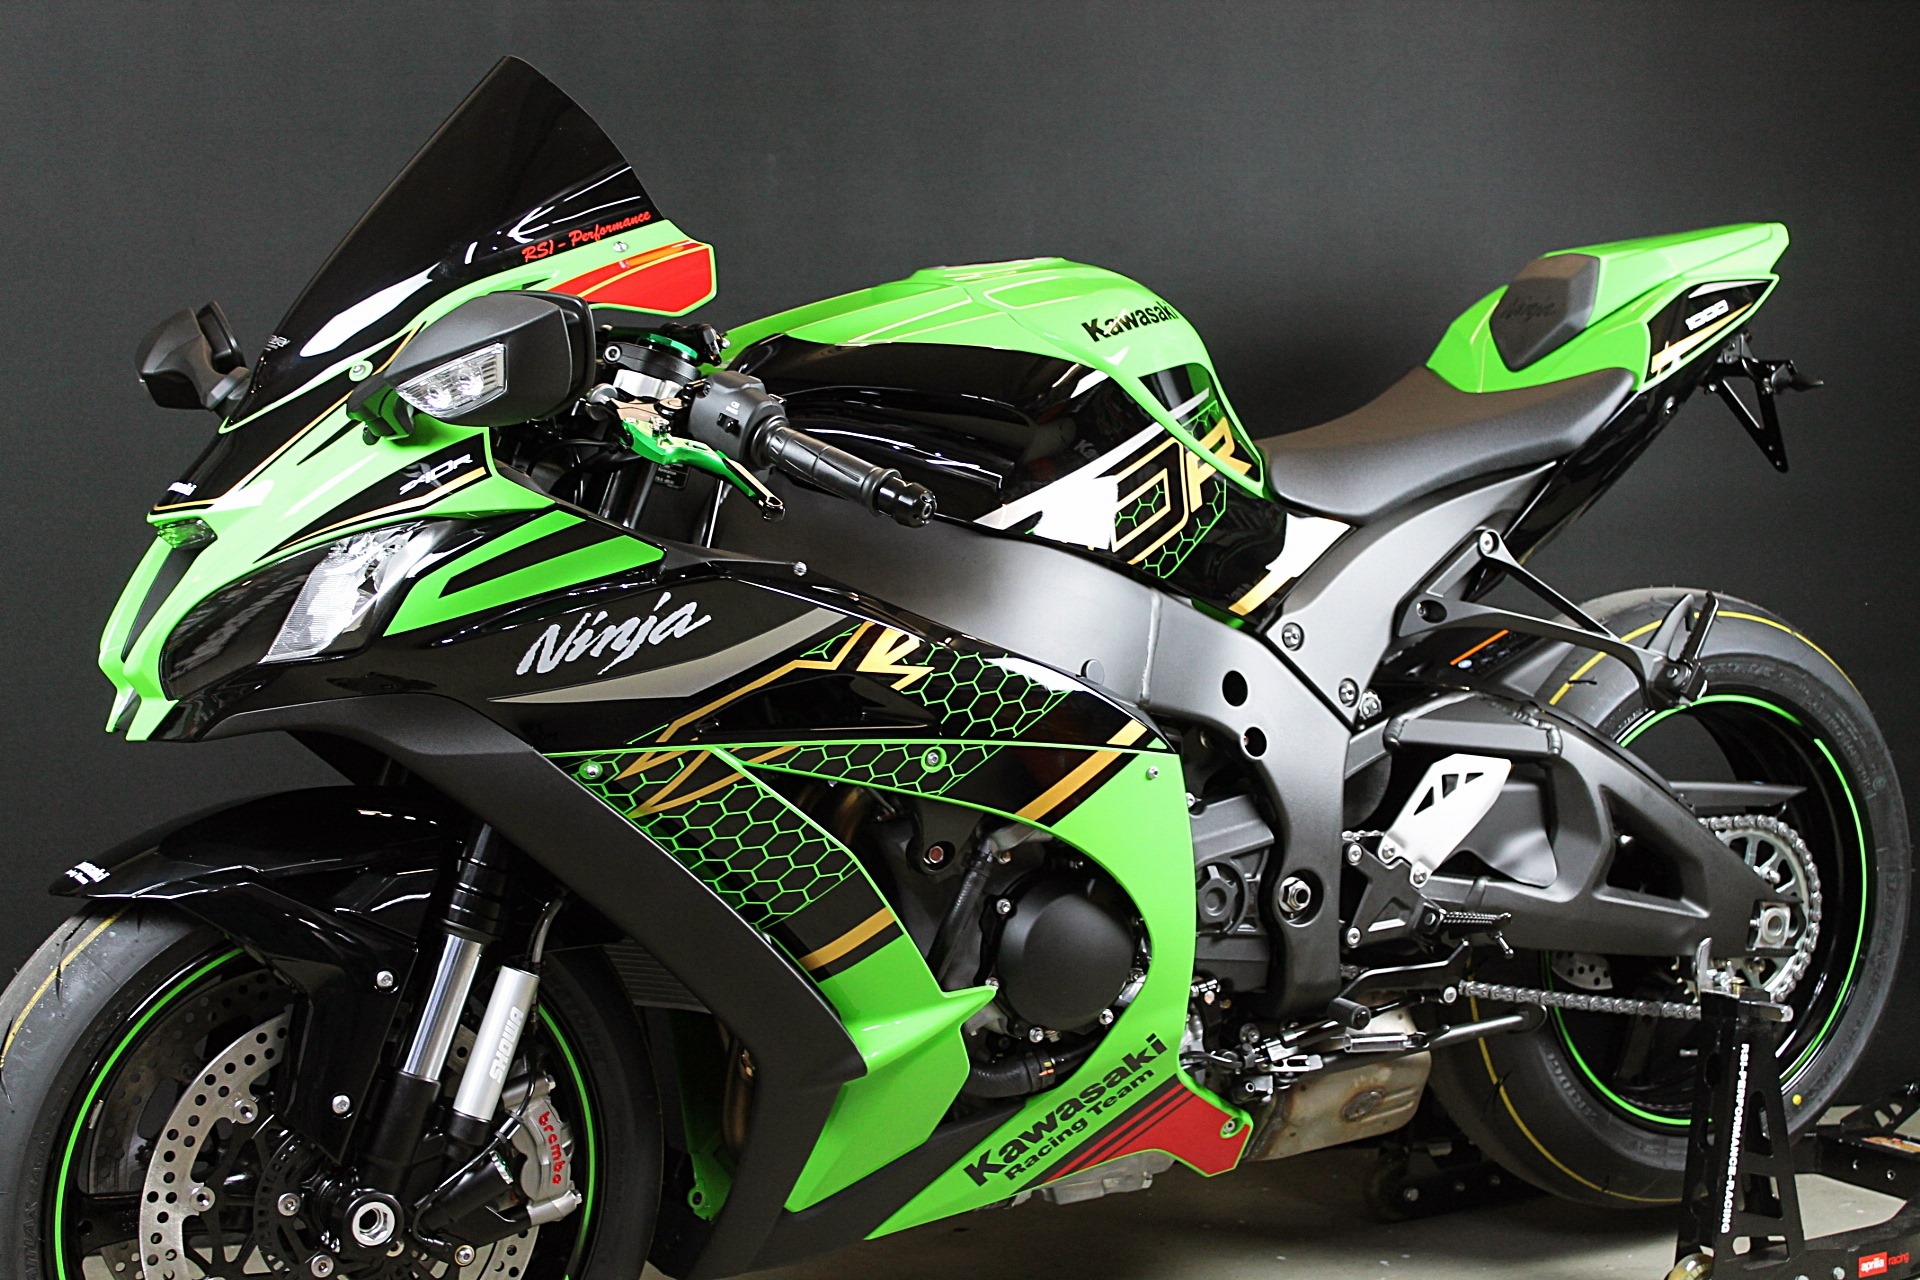 ZX-10R 2020 ABS RSI ,,KRT Racing Edition,,